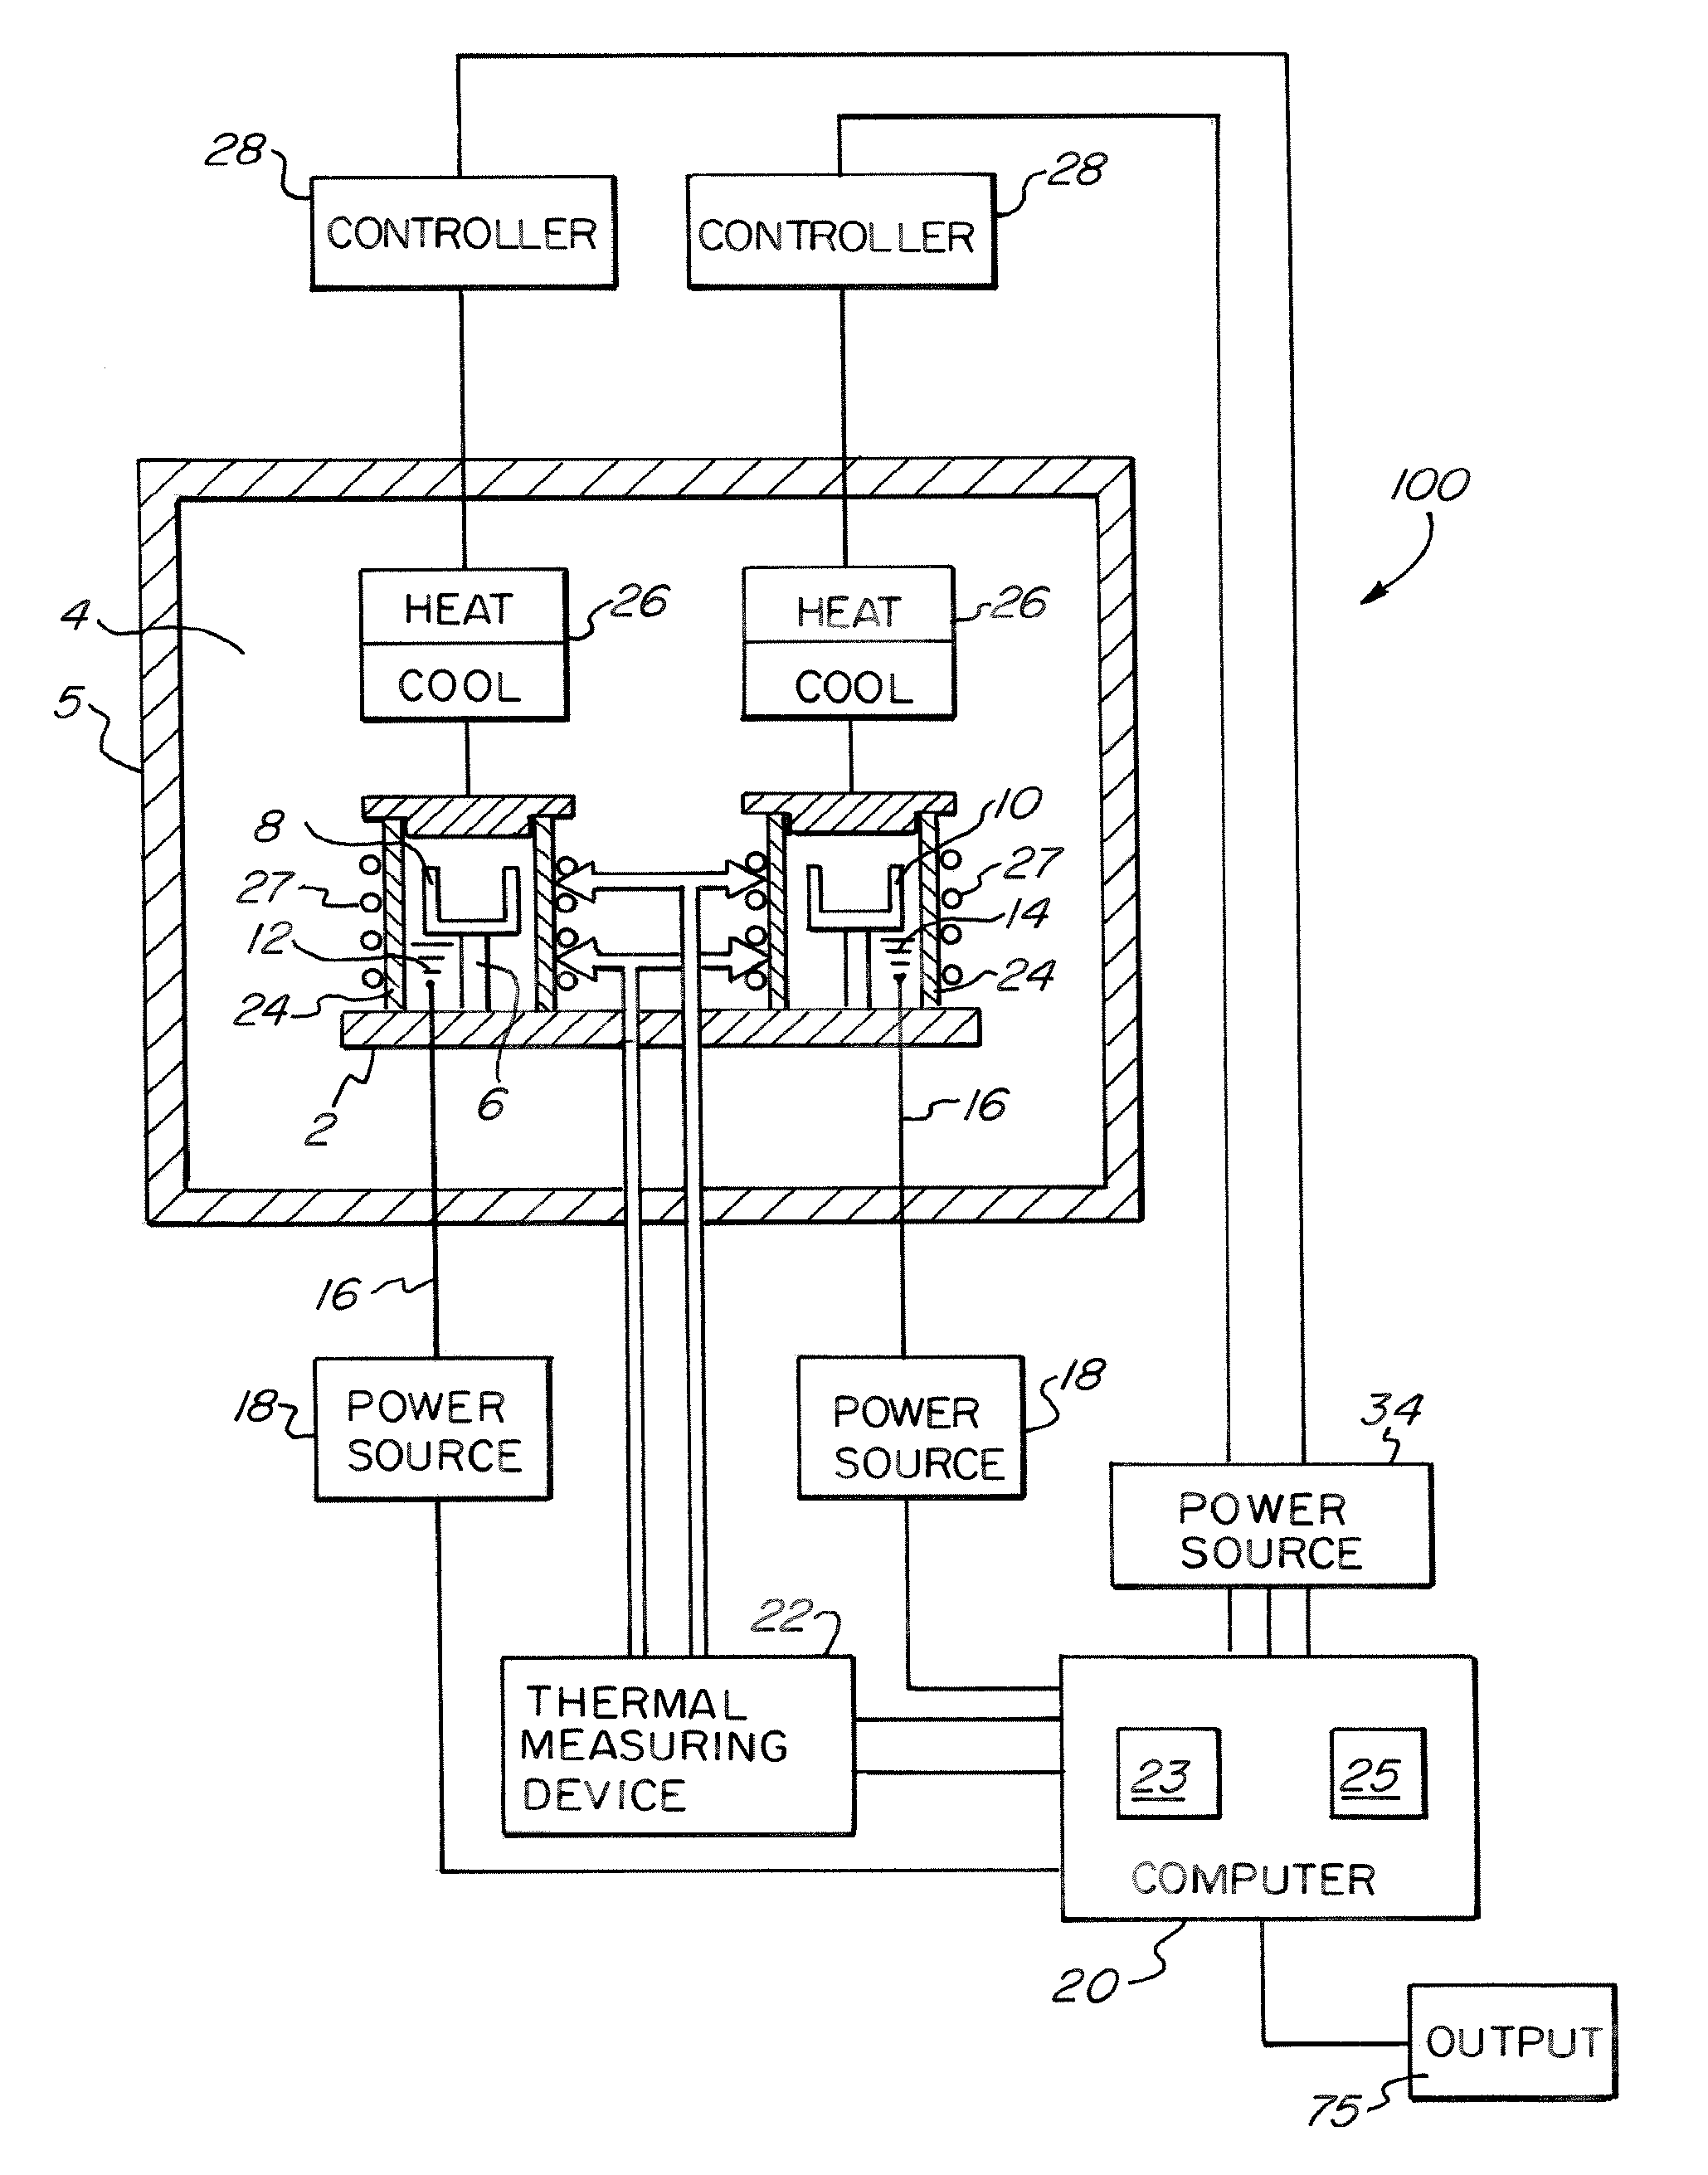 Differential Scanning Calorimeter (DSC) With Temperature Controlled Furnace